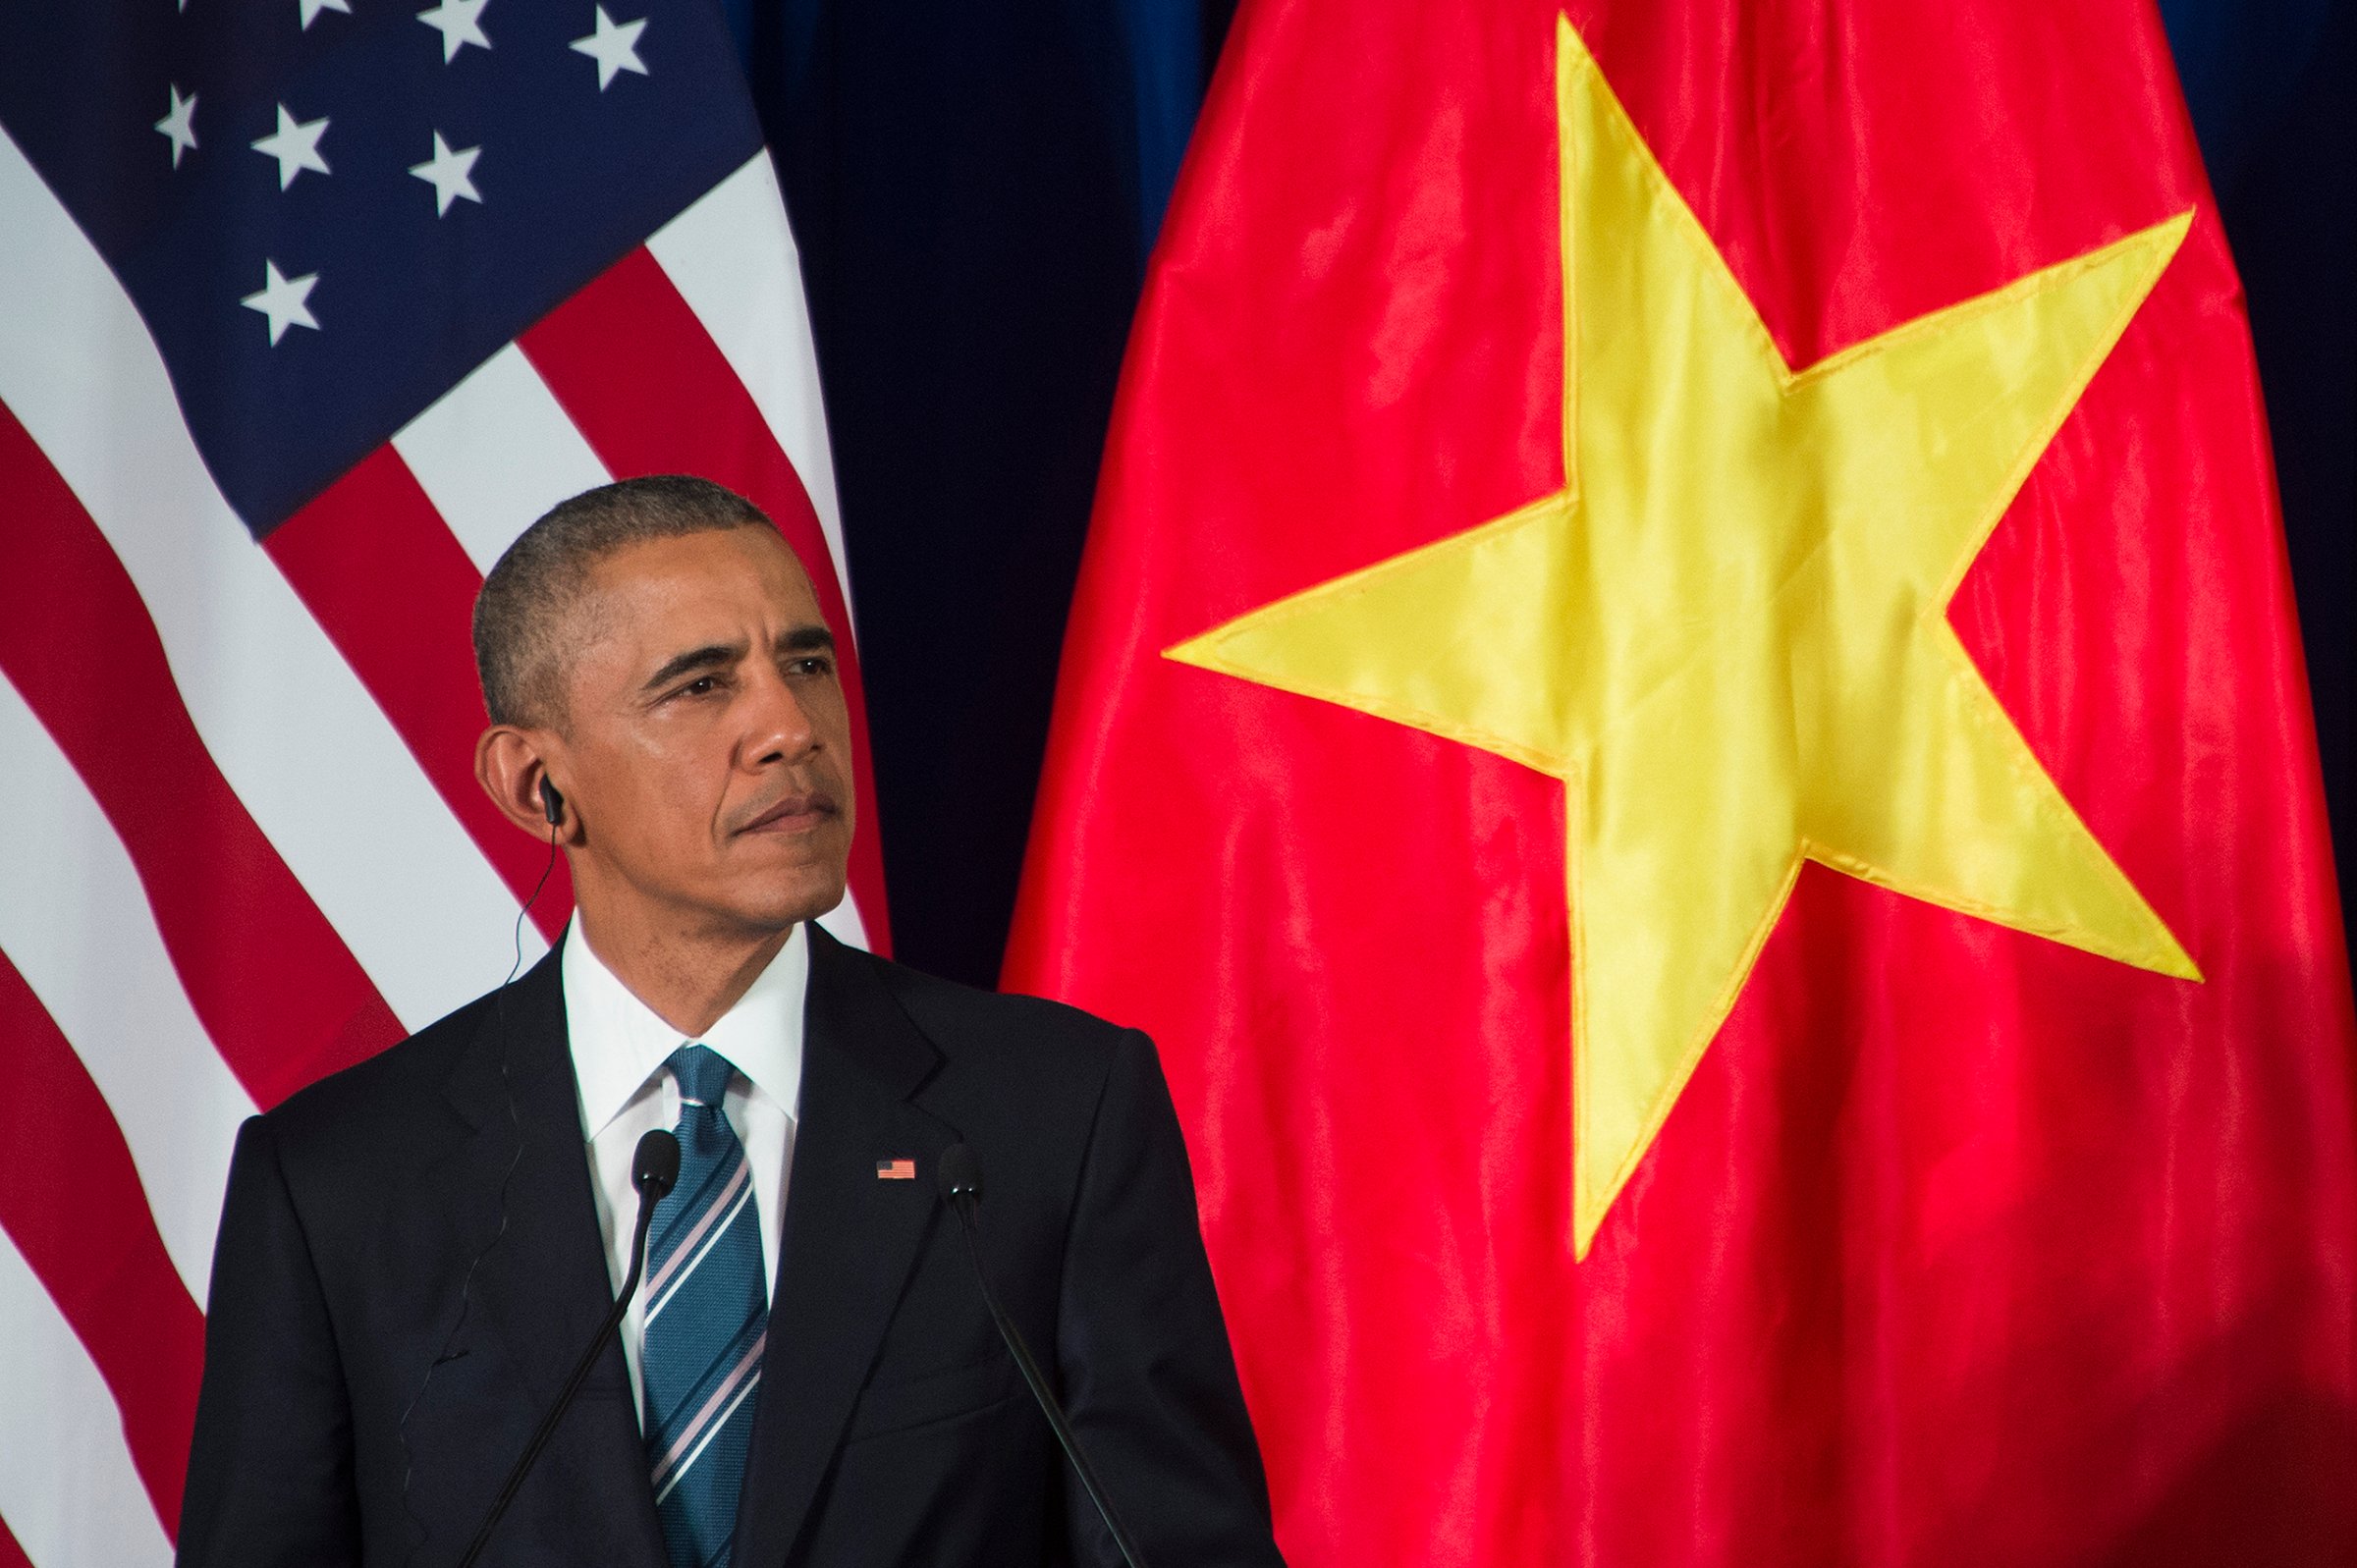 Barack Obama speaks during a joint press conference in Hanoi on May 23, 2016.